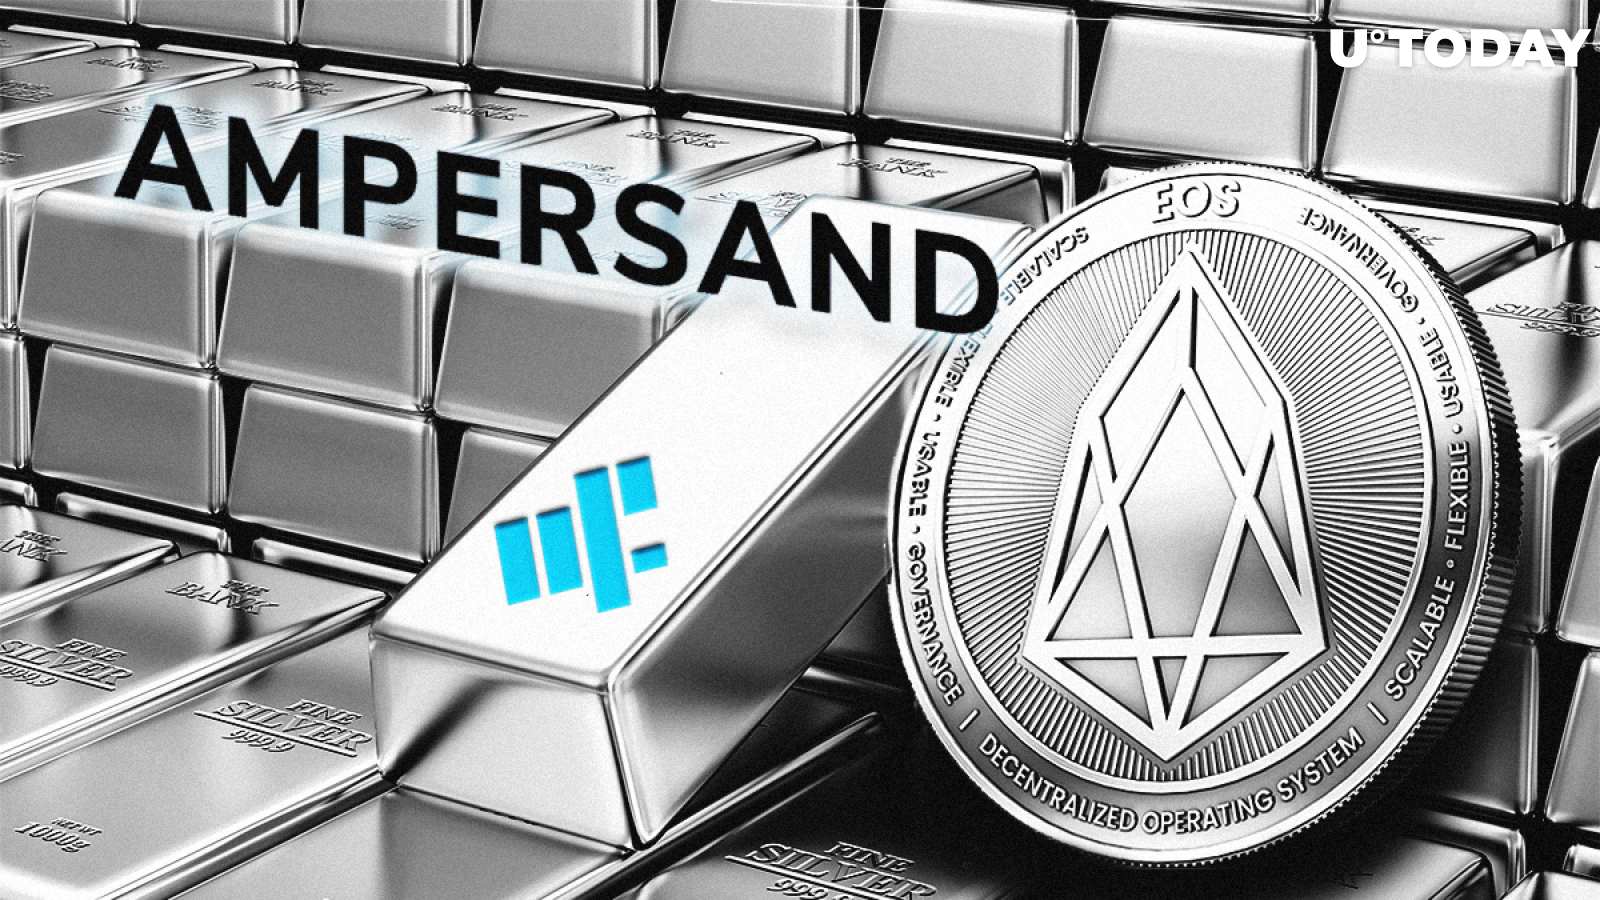 Ampersand Consortium Launched to Promote New EOS-Based Ecosystem for Silver